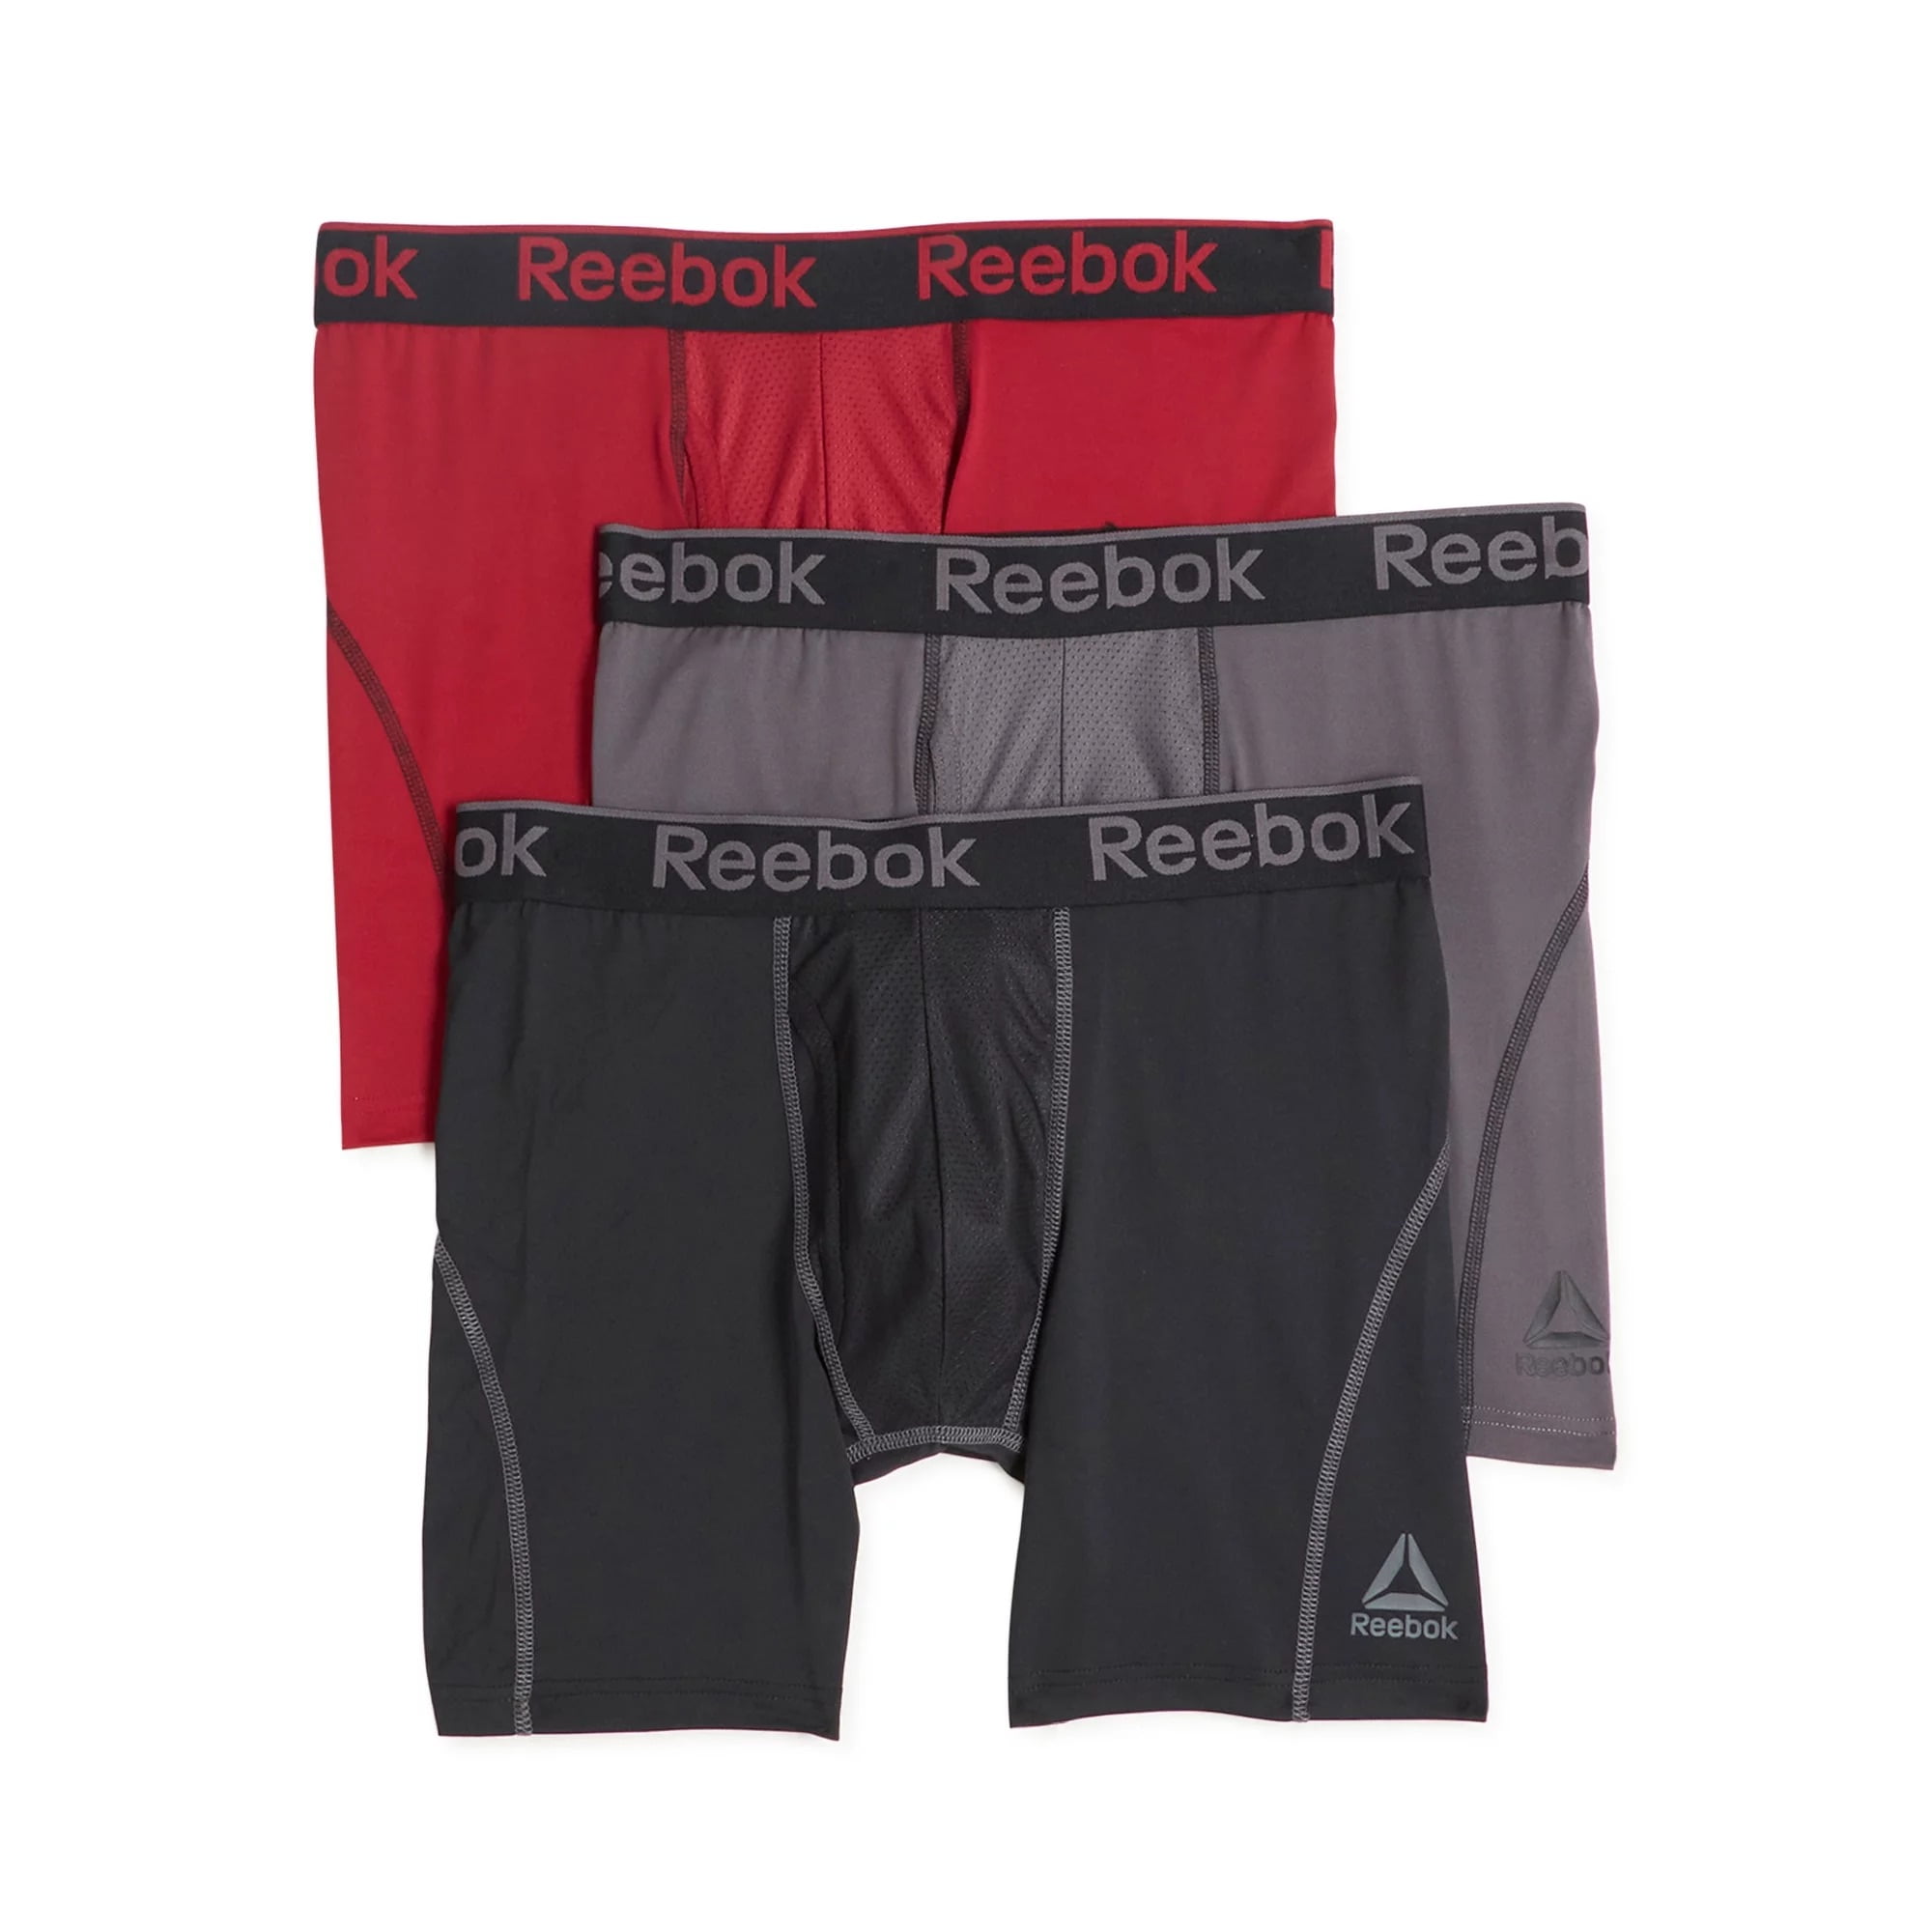 Up To 50% Off Six-Pack of Reebok Underwear